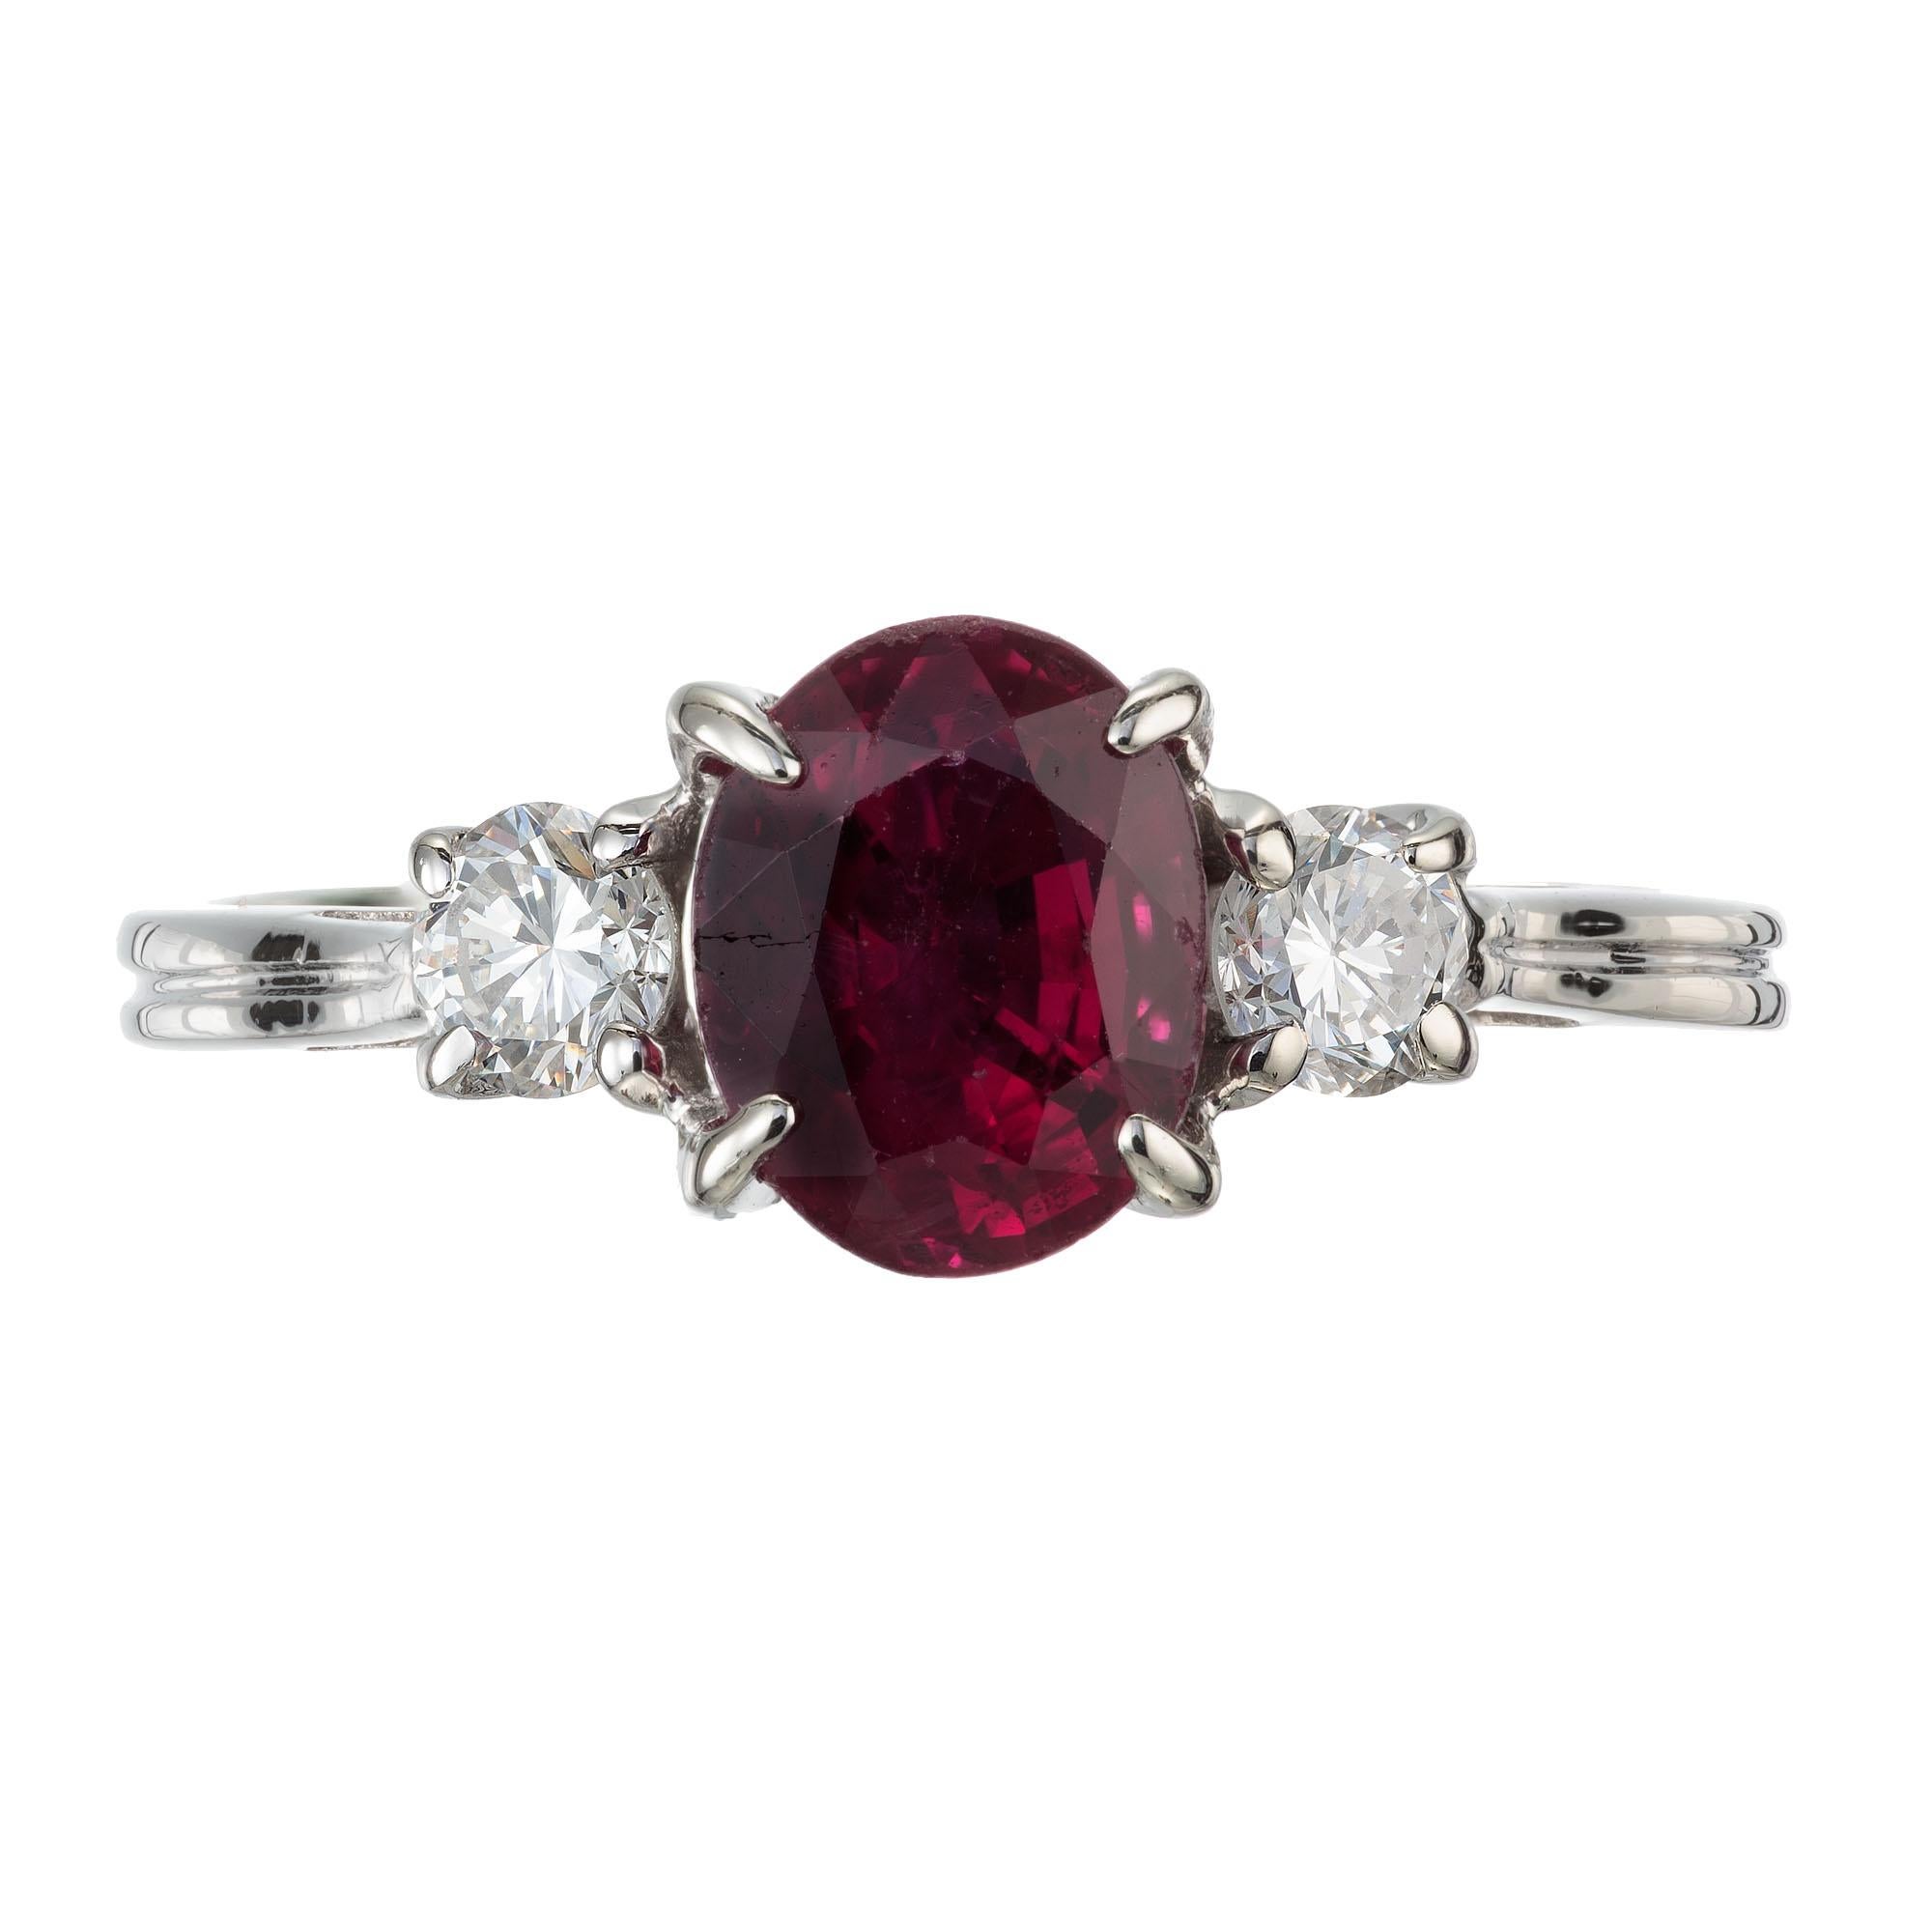 Natural simple heat Ruby and diamond ring. Oval center ruby with two round side diamonds in a classic three-stone 14k white gold setting. AGL certified.   

1 bright red oval Ruby, approx. 1.07cts AGL certificate #GB51731
2 brilliant cut diamonds,